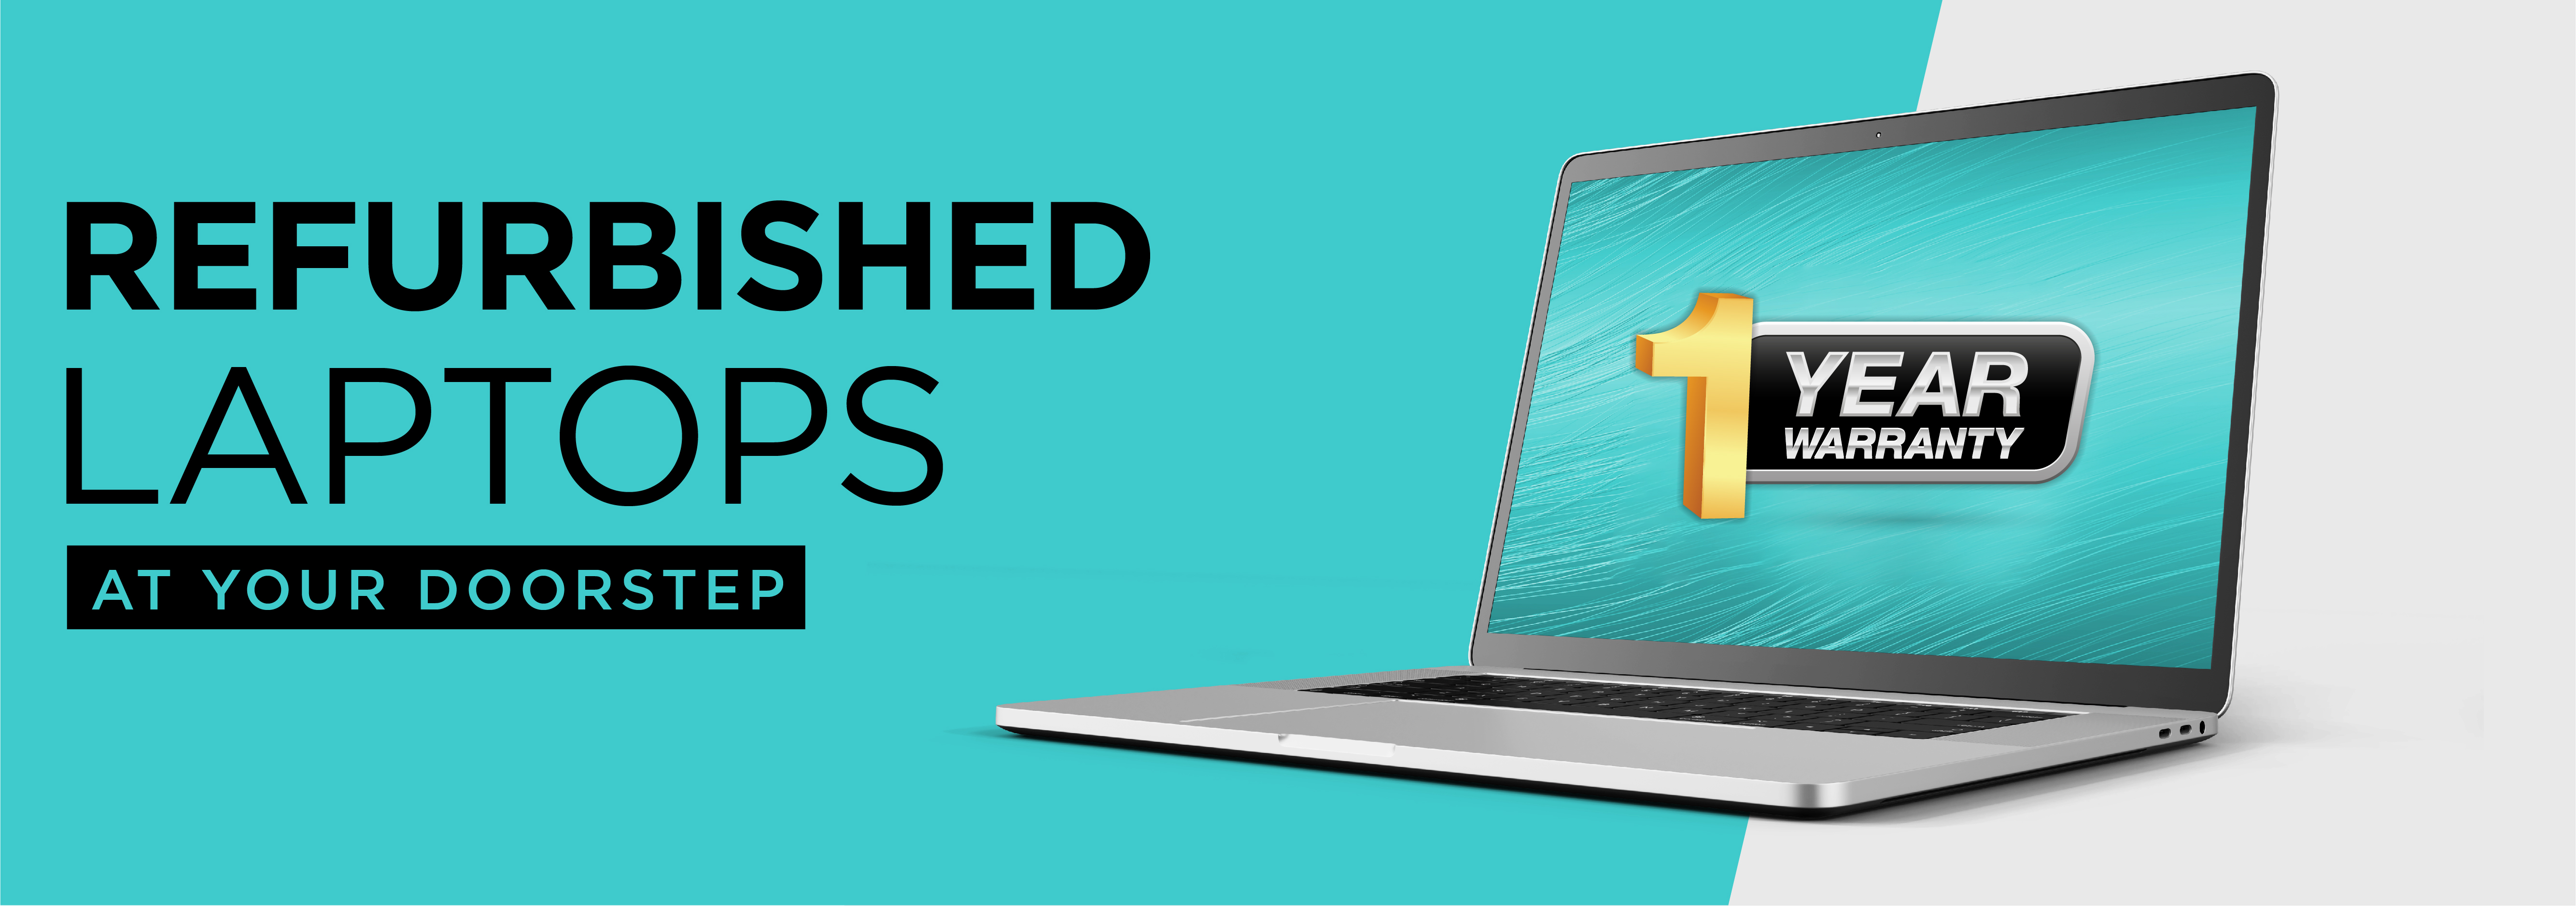 Refurbished Laptop India | Second Hand Laptop | 60% OFF | Lappyy